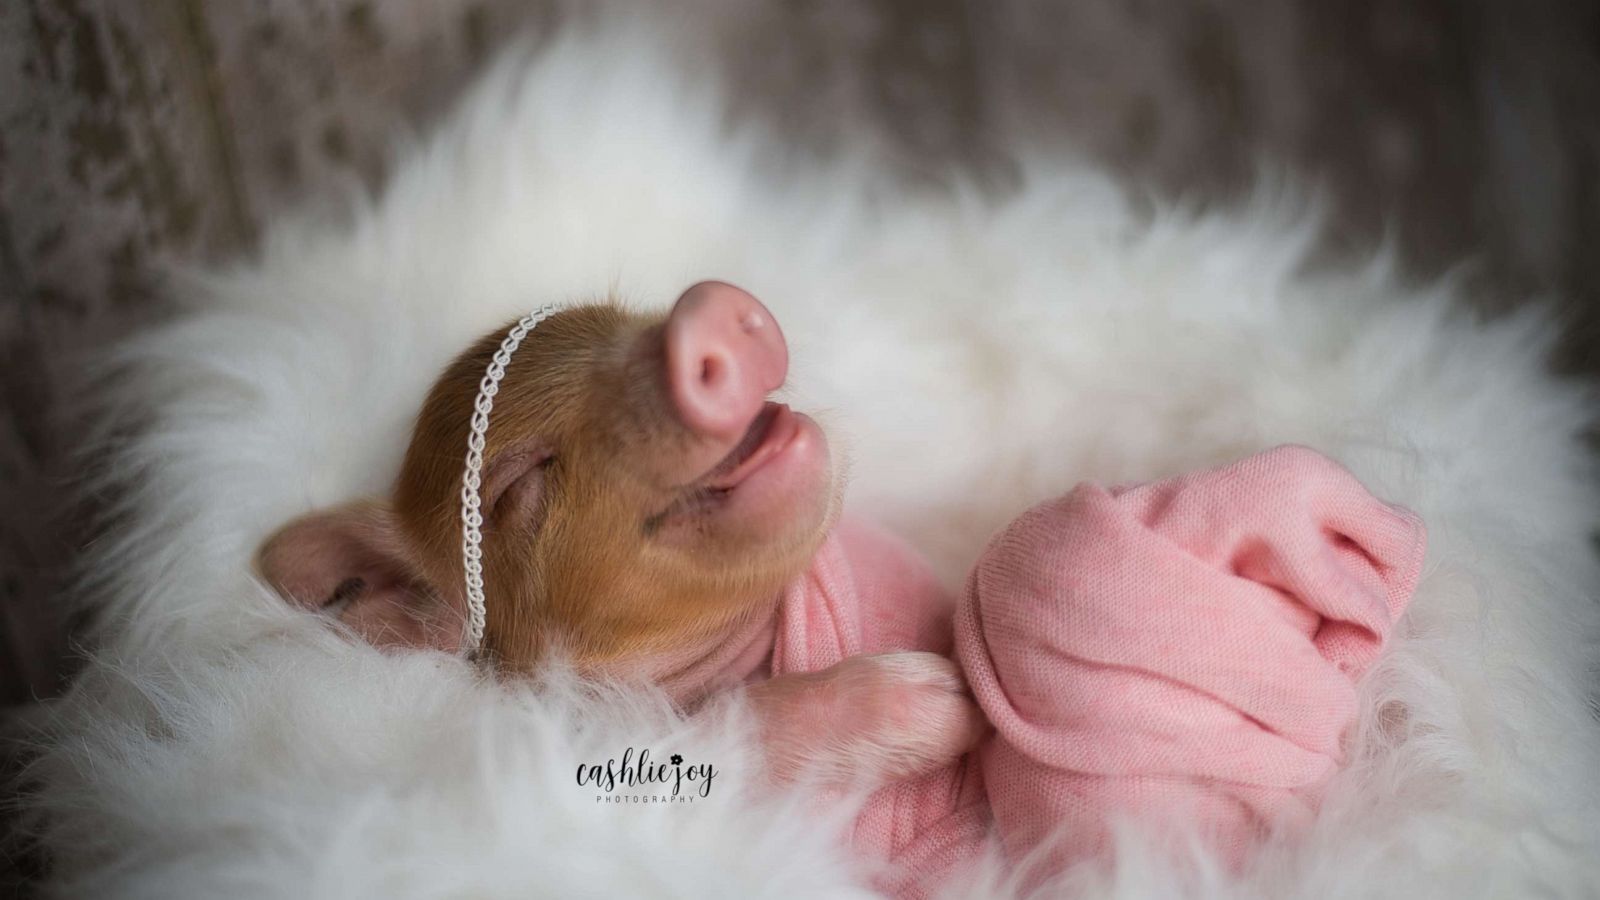 cute baby pigs in boots